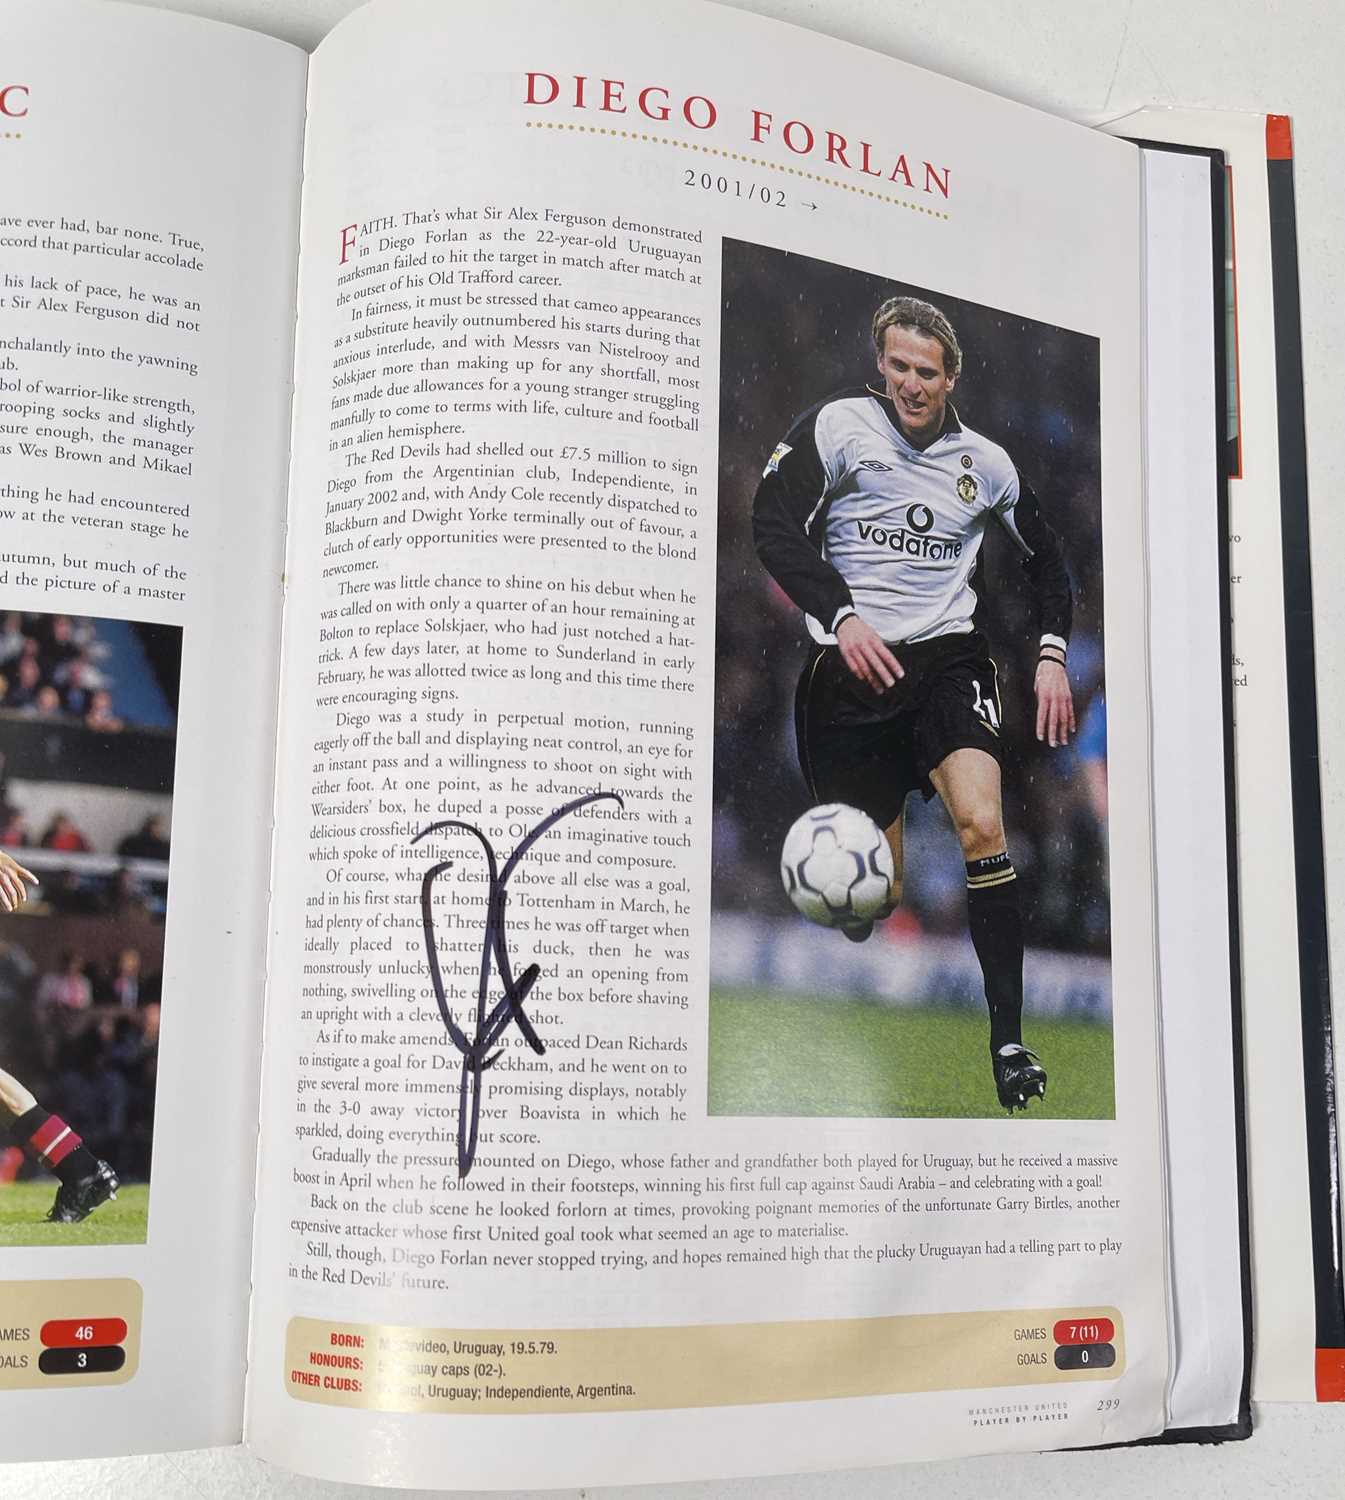 FOOTBALL MEMORABILIA - MANCHESTER UNITED MULTI SIGNED 'PLAYER BY PLAYER' BOOK. - Image 50 of 50